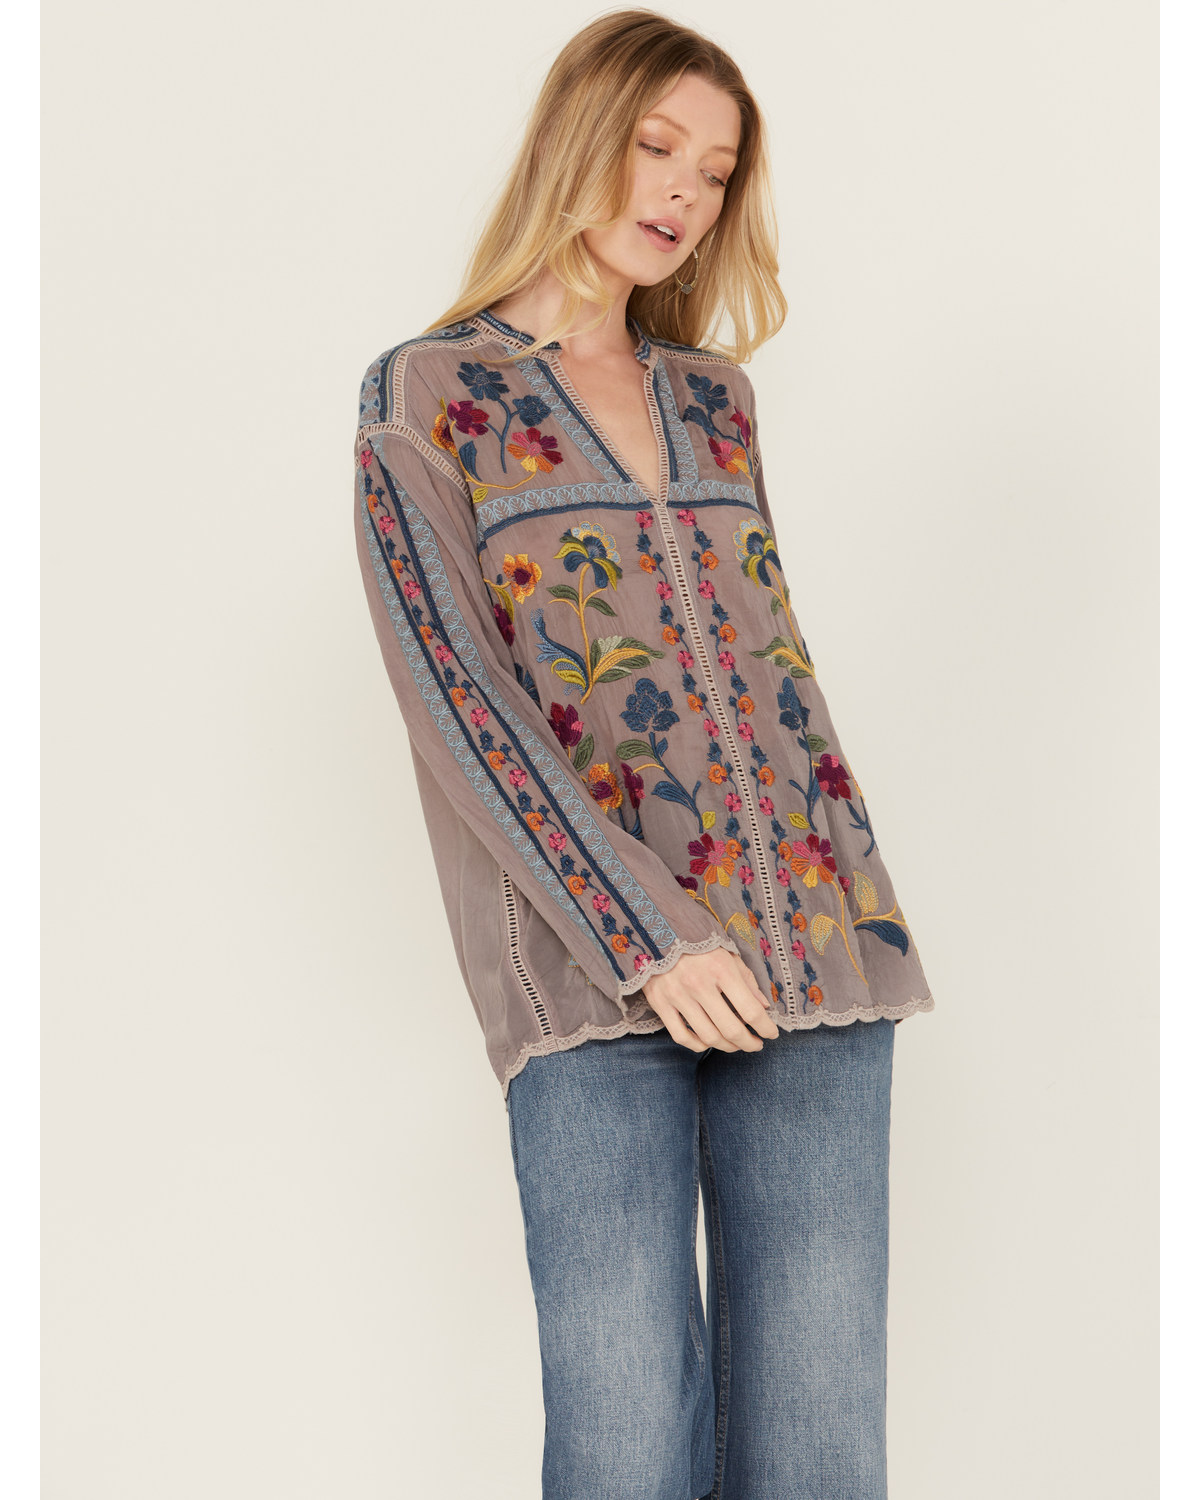 Johnny Was Women's Floral Embroidered Long Sleeve Shirt